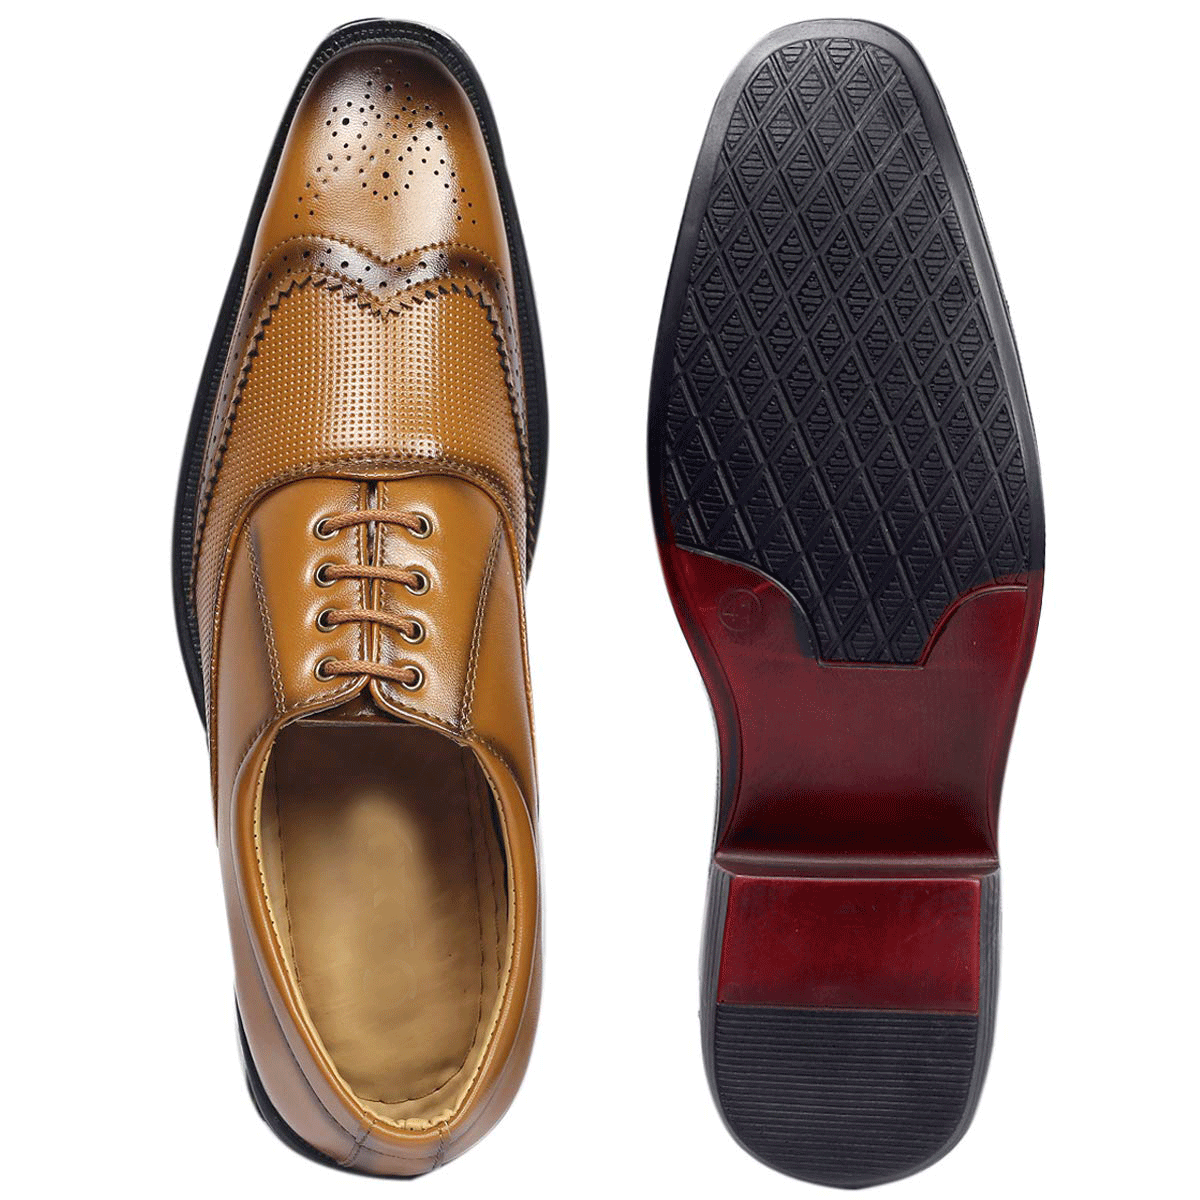 Height Increasing Tan Casual And Formal Lace-Up Shoes For Men-JonasParamount